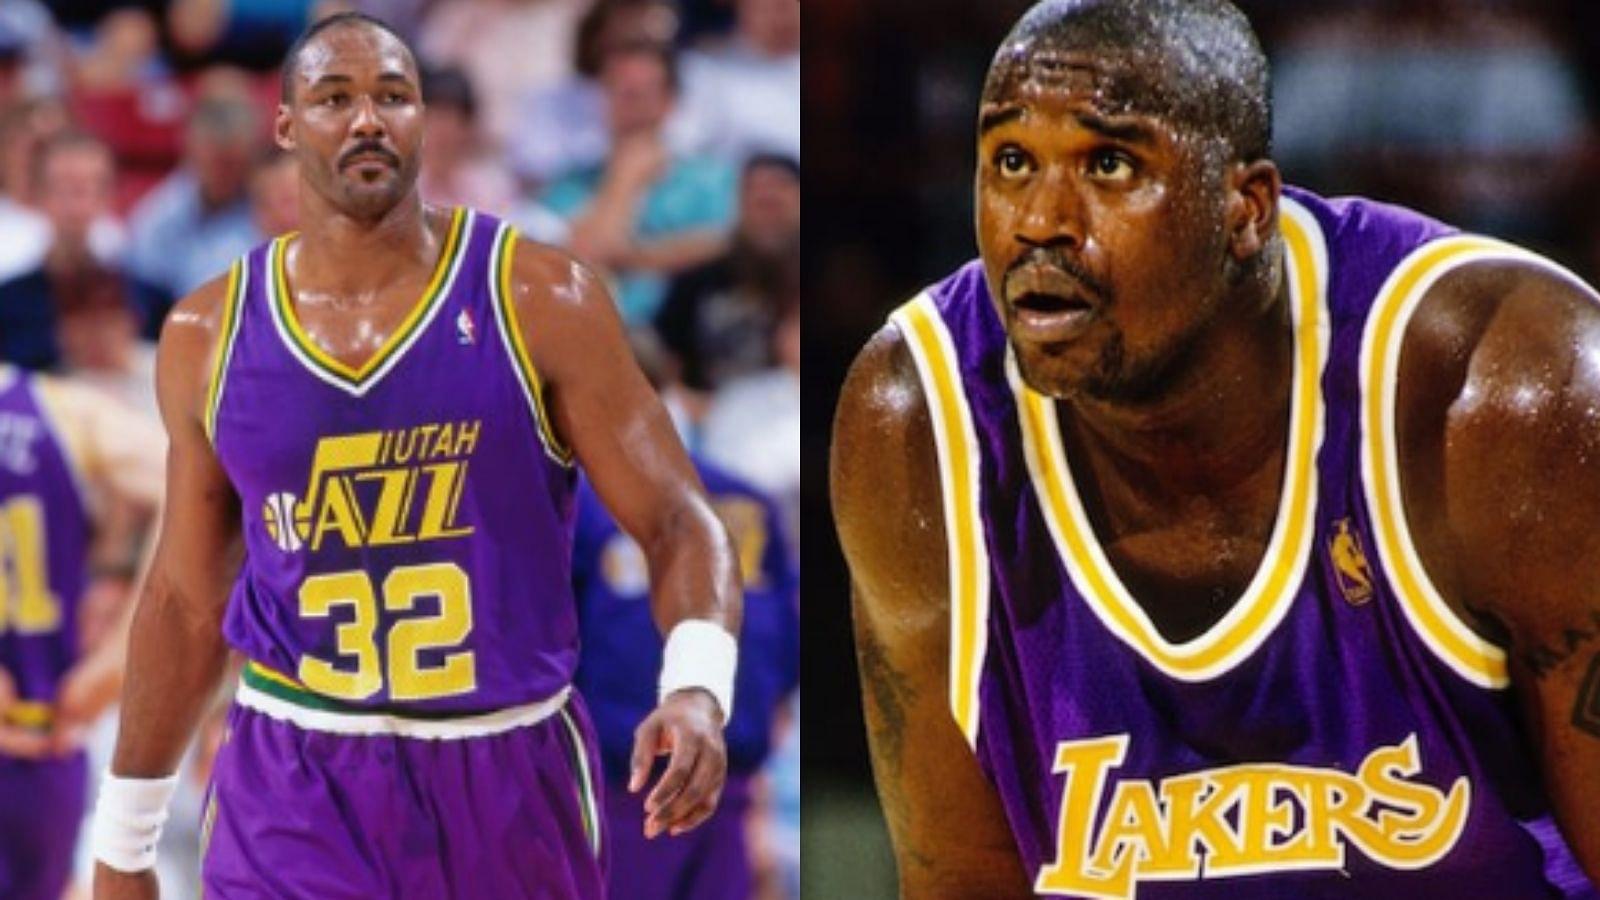 "Karl Malone schooled Shaquille O’Neal in front of Kobe Bryant!": When The Mailman put on a show against The Diesel and the Lakers in the 1997 Playoffs